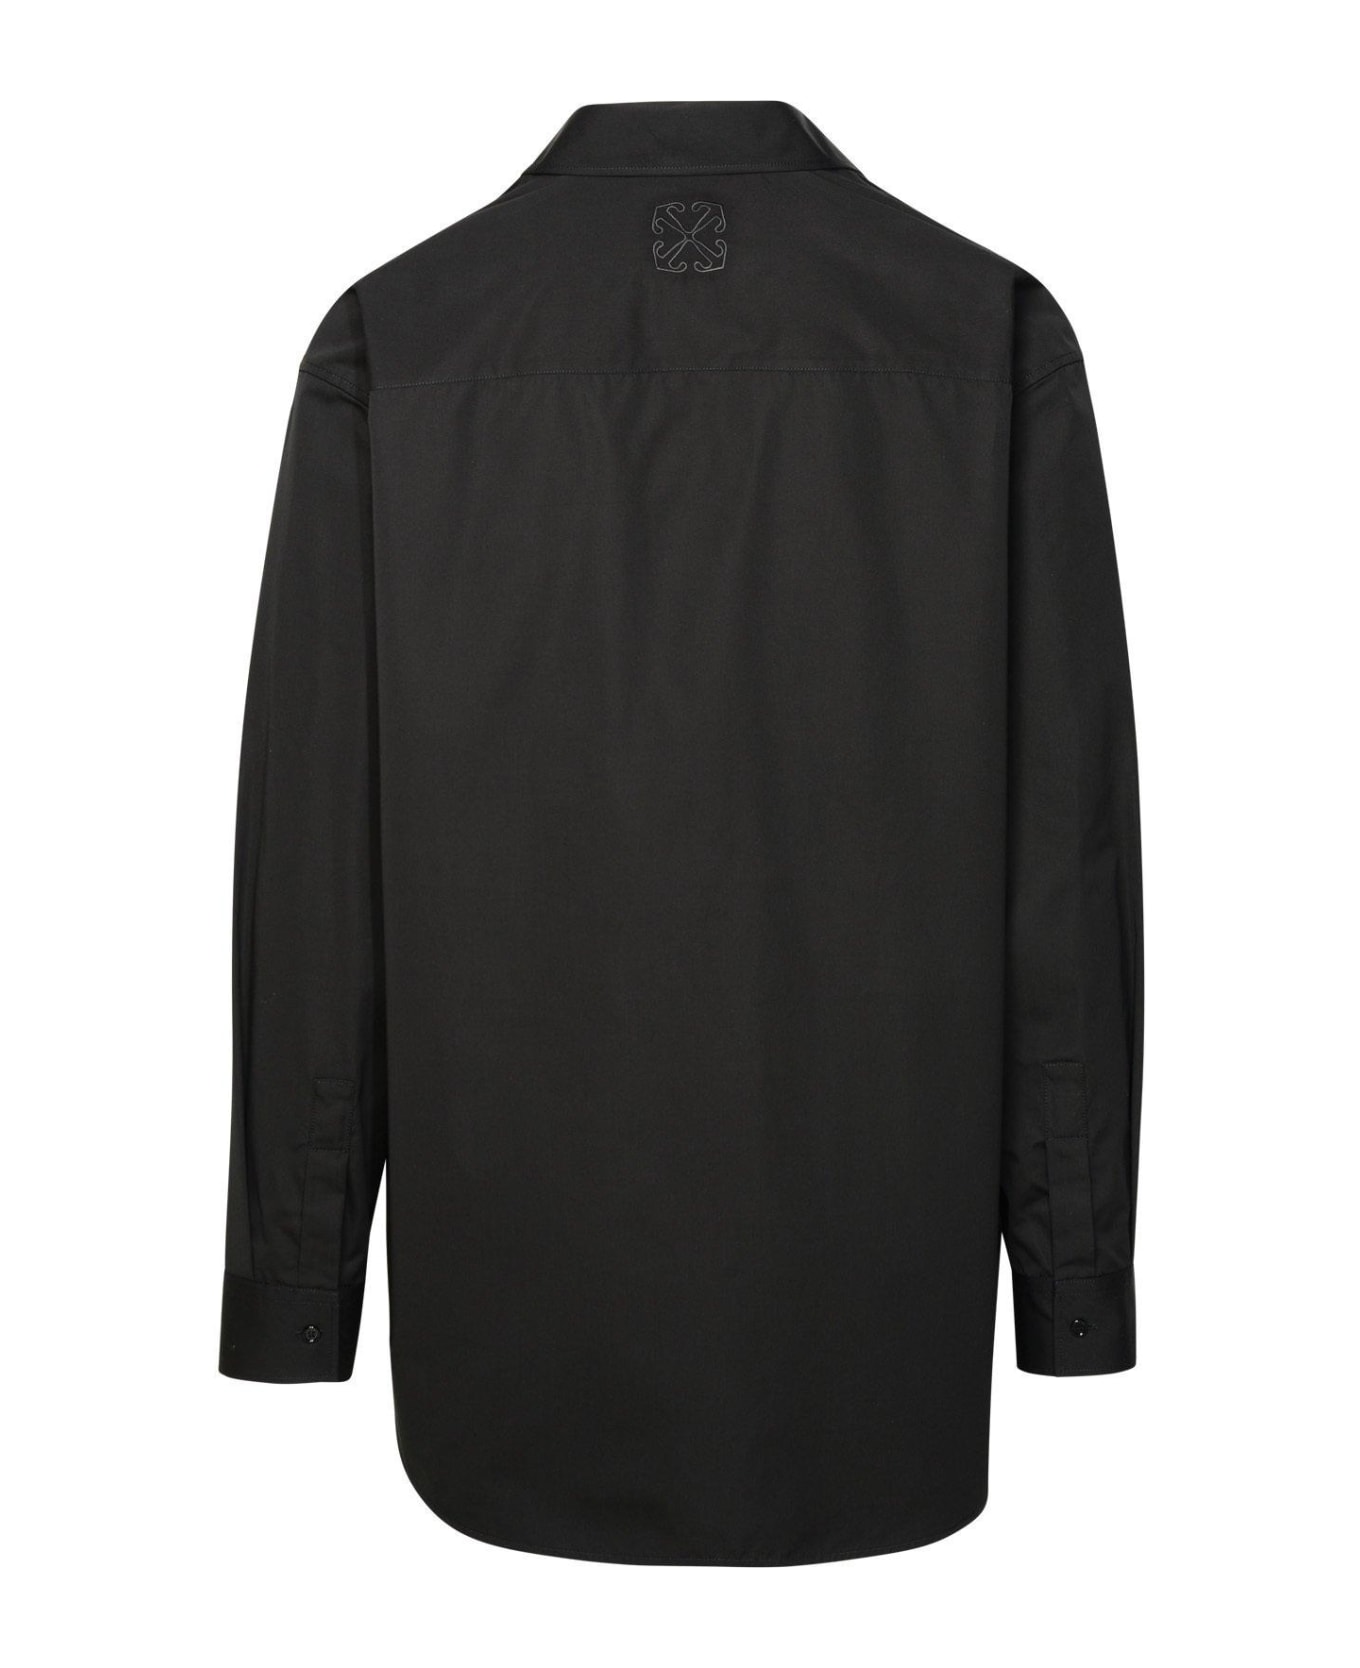 Off-White Logo Embroidered Long-sleeved Shirt - Nero/bianco シャツ